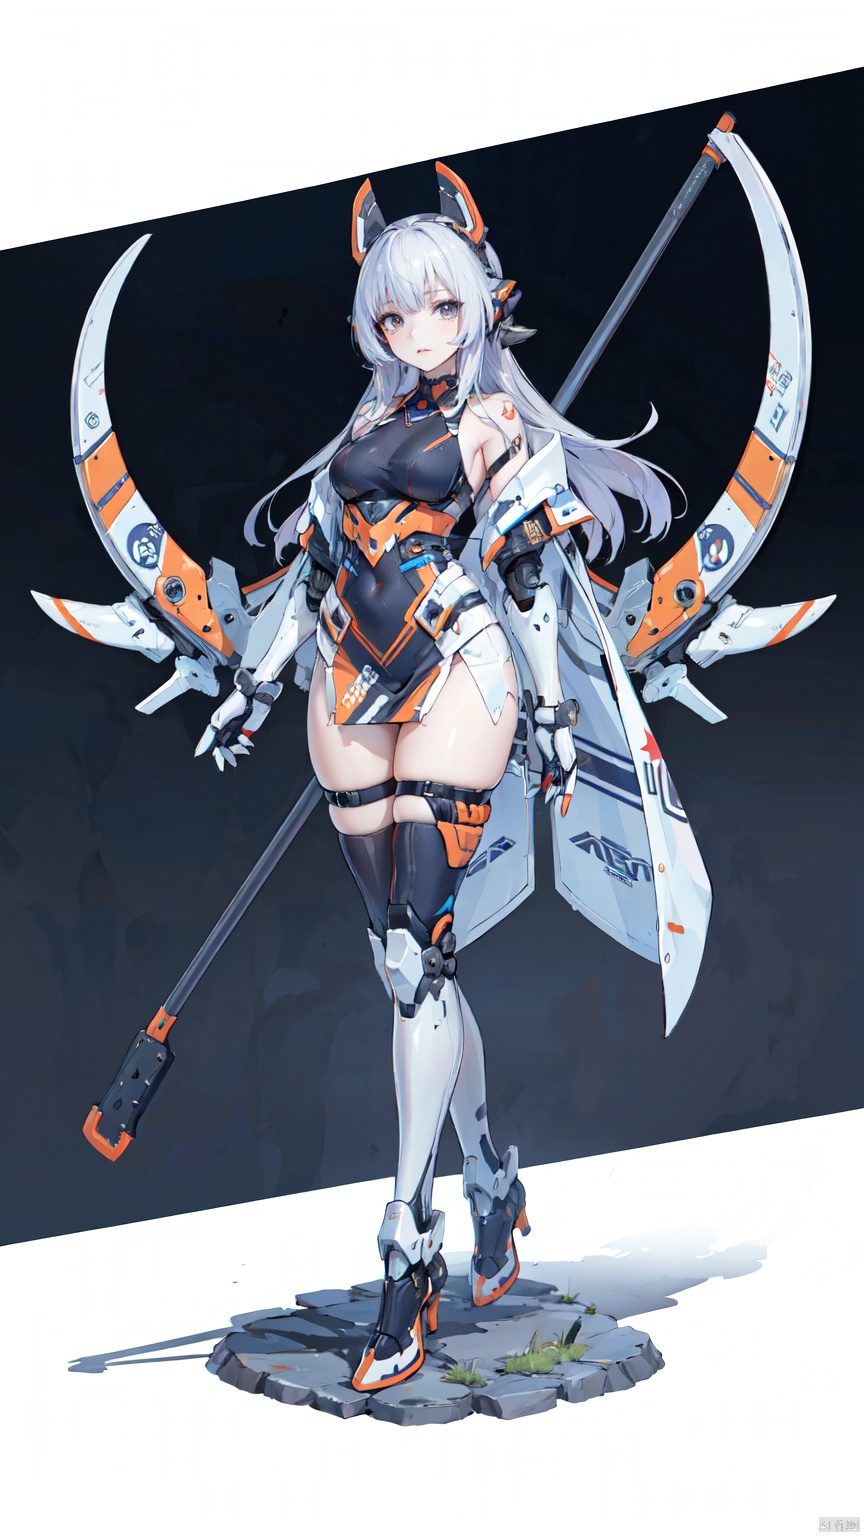  8k, best quality, masterpiece, (ultra-detailed:1.1), (high detailed skin),
(full body:1.3),
////////////////////////
jiqi, art style, mecha, robot, no humans, solo, science fiction, holding, weapon, standing, holding weapon, scythe, looking down, open hand, holding axe, axe, redesign
///////////////////////////////
(beautiful_face), ((intricate_detail)), clear face,
((finely_detailed)), fine_fabric_emphasis,
((glossy)), full_shot,